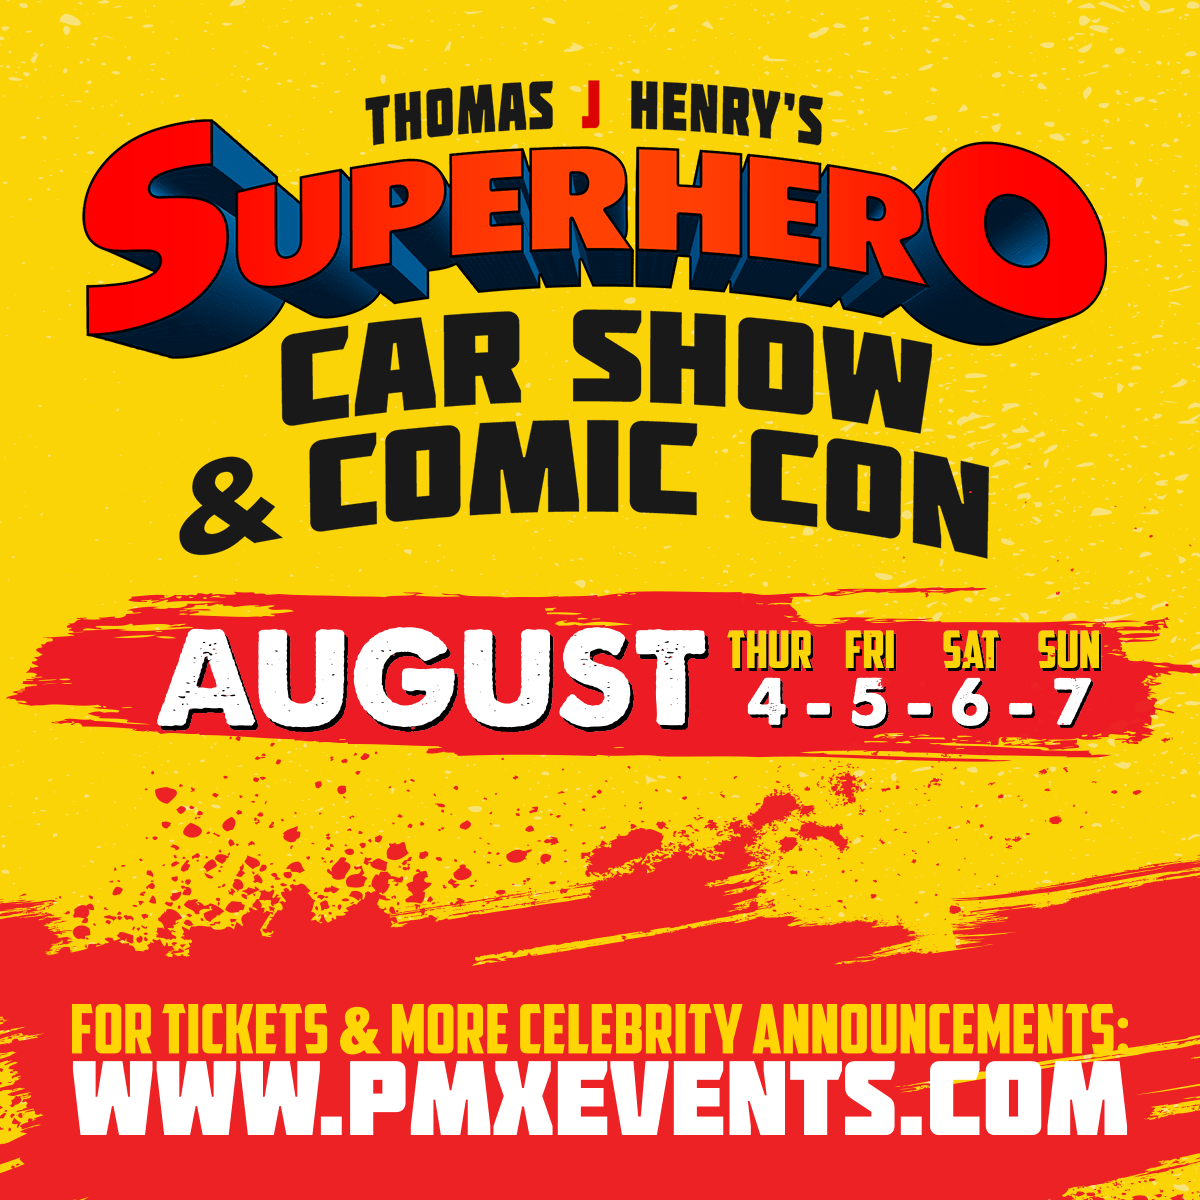 thomas j henry superhero car show & comic con red, yellow and white text graphic with dates